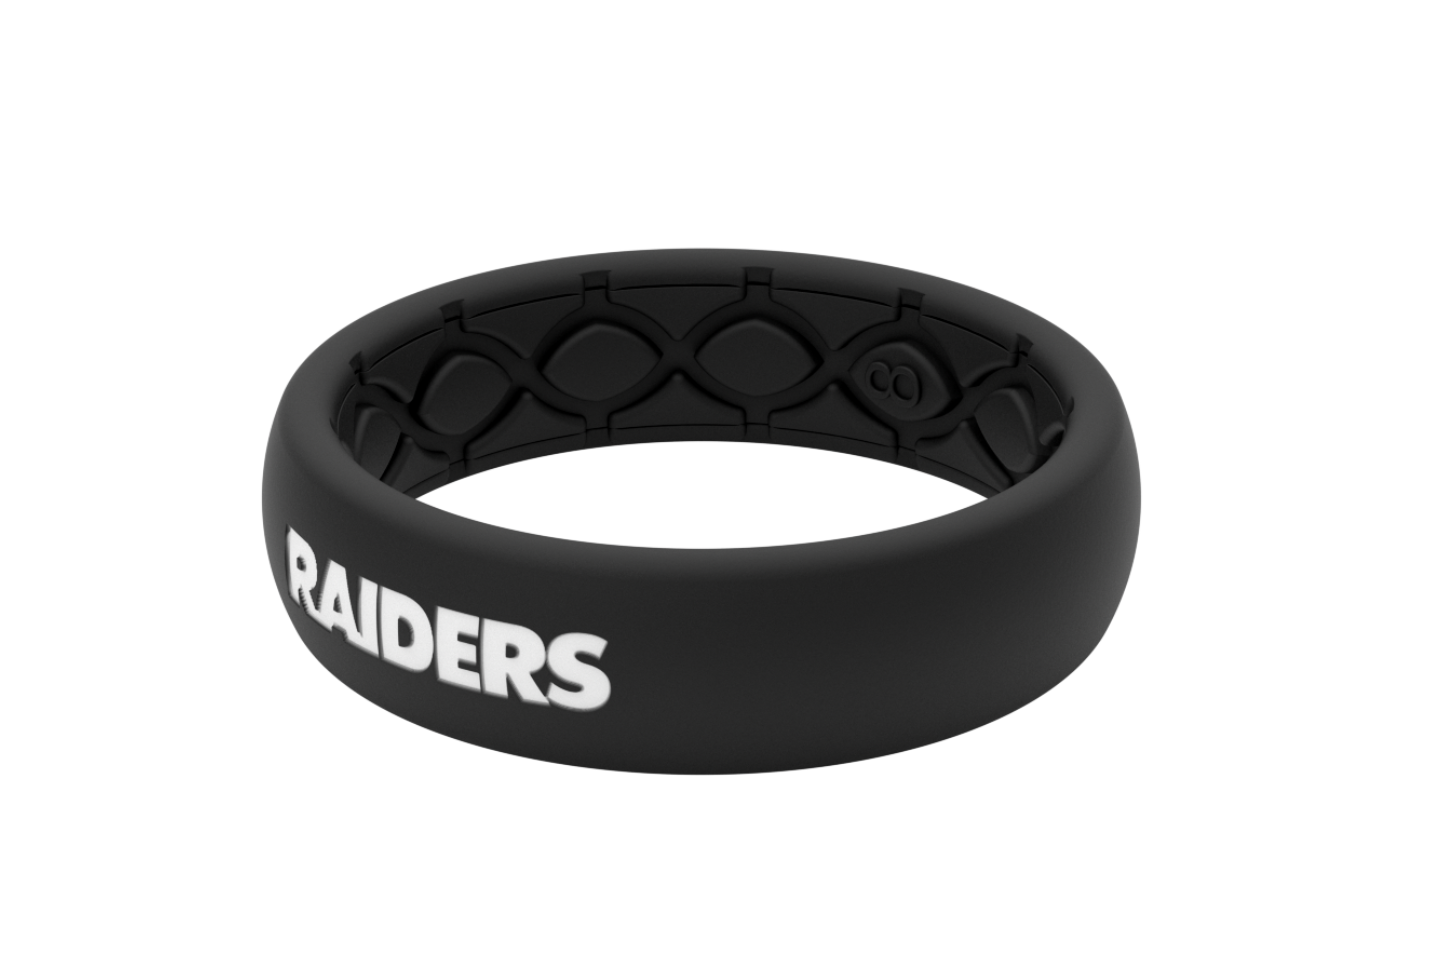 Game Time Las Vegas Raiders Signature Series Apple Watch Band With Eng -  Game Time Bands